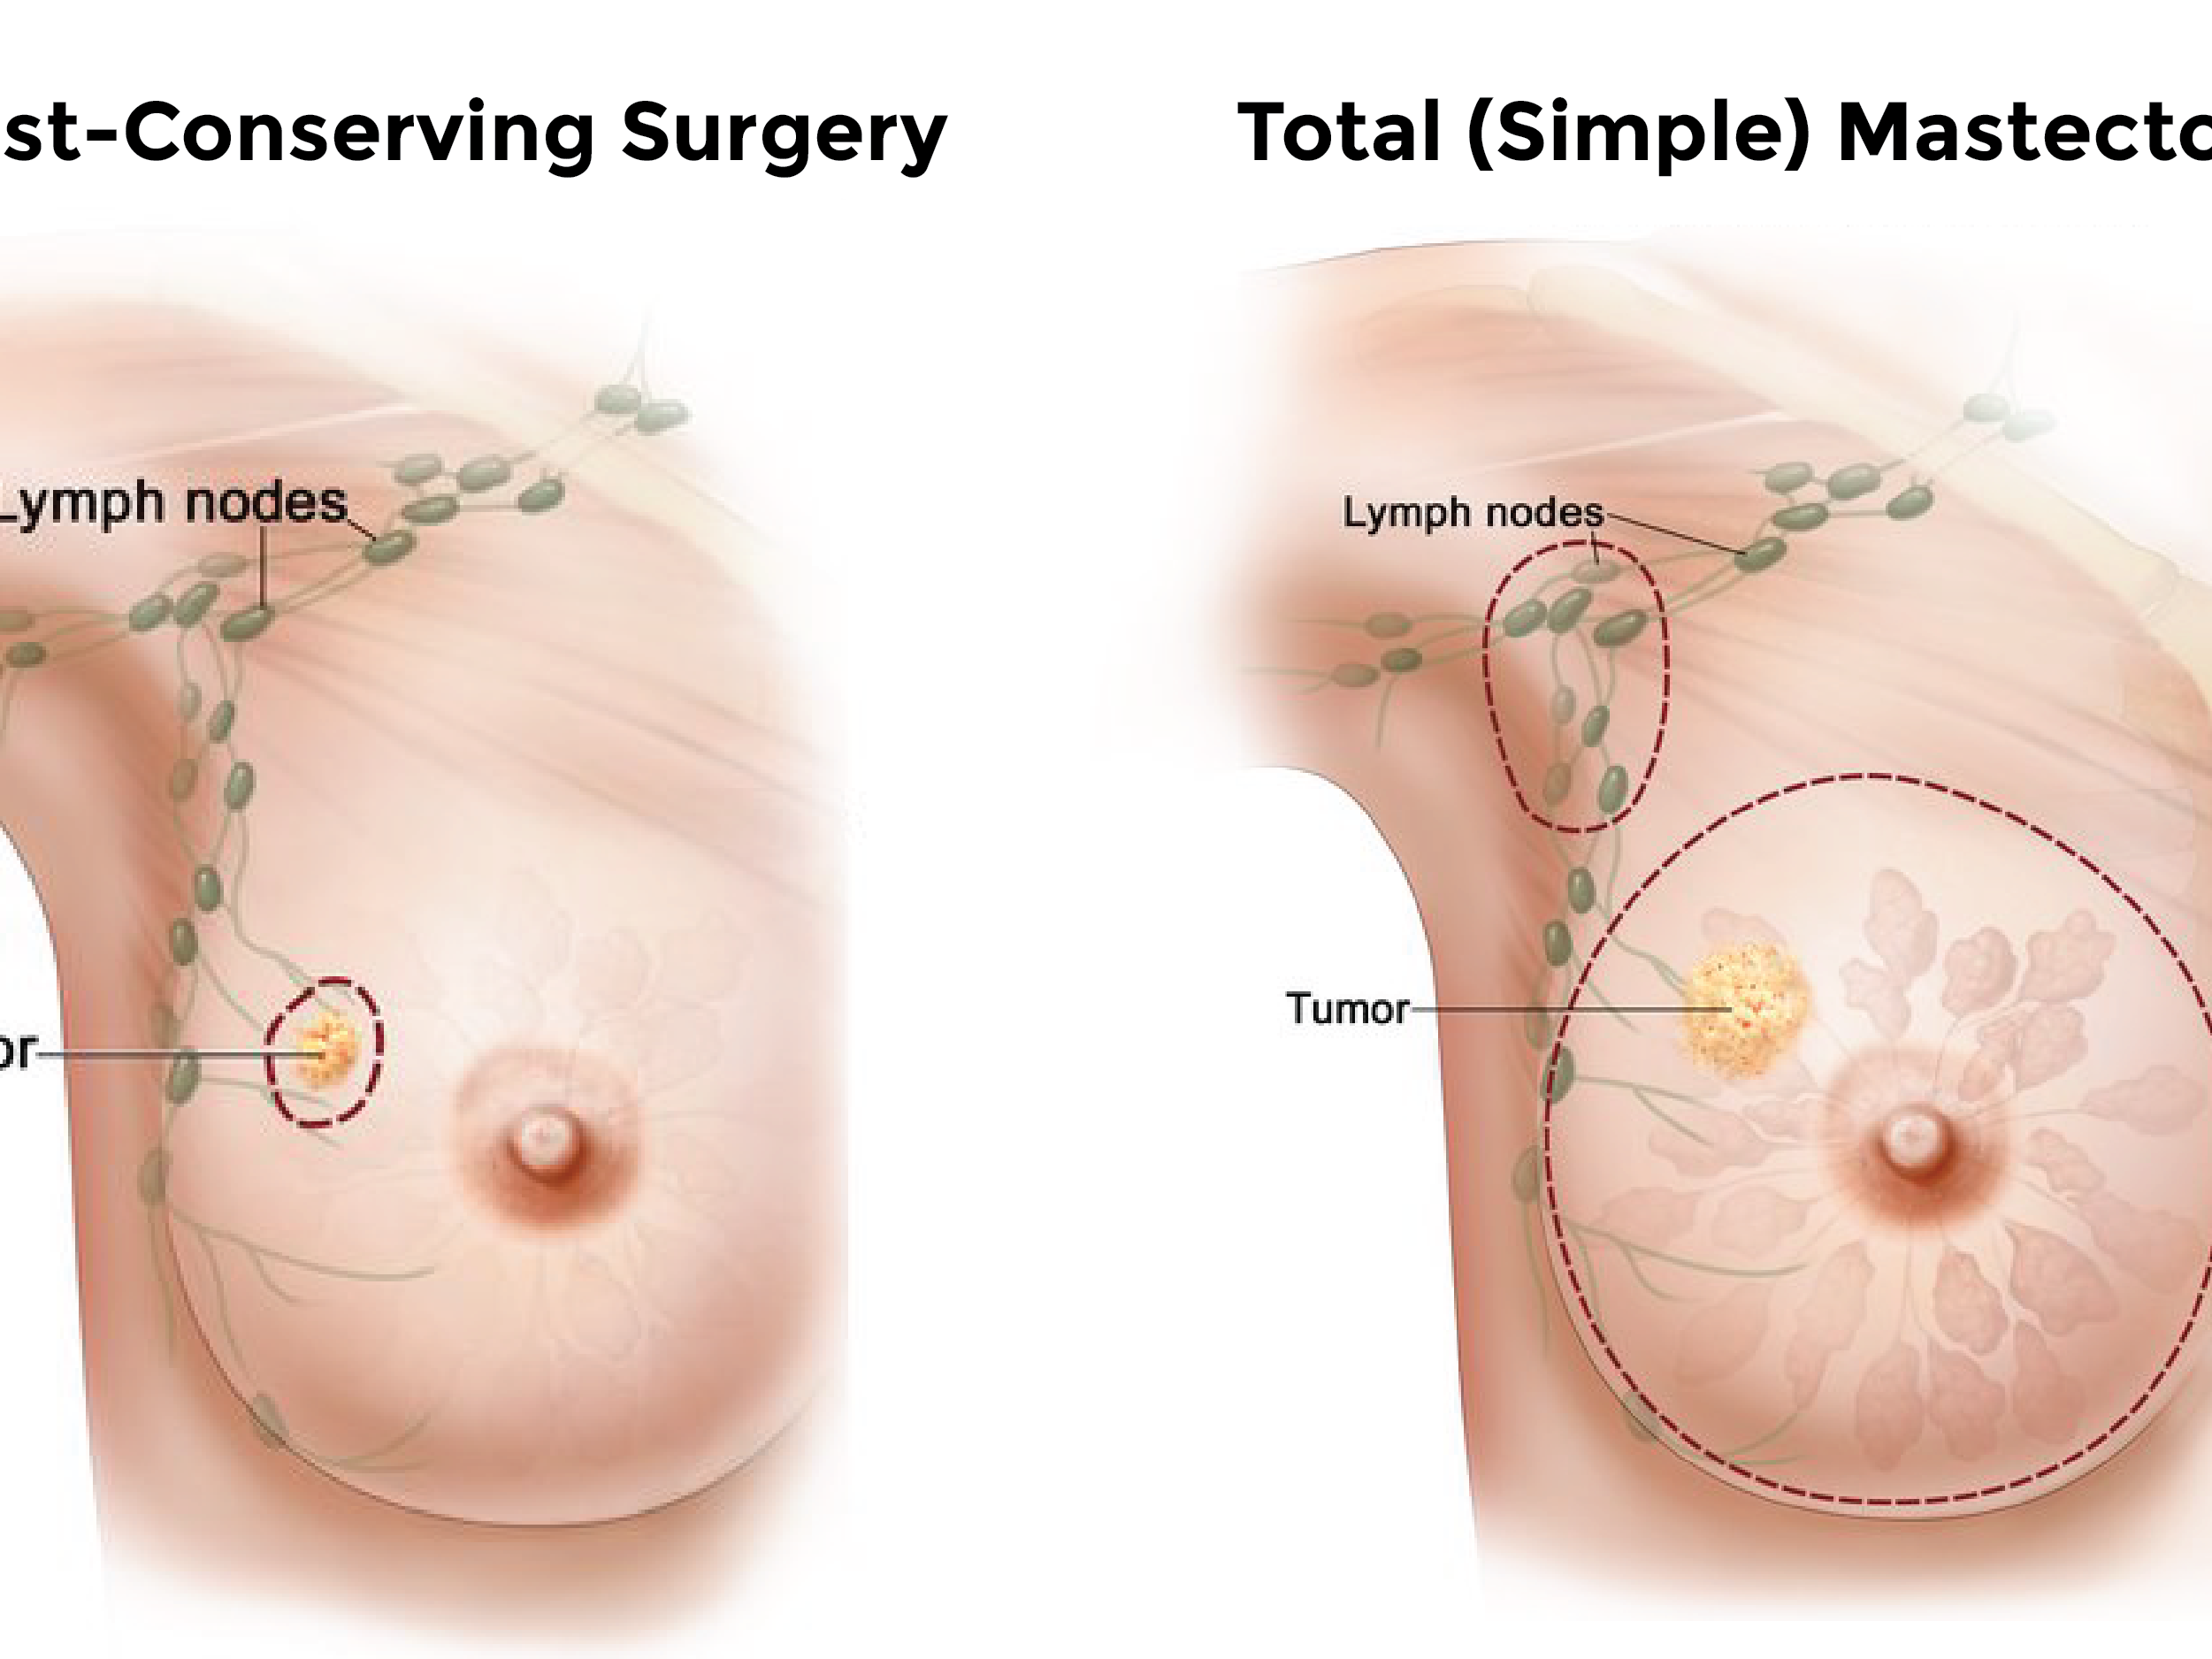 https://www.cancer.gov/sites/g/files/xnrzdm211/files/styles/cgov_social_media/public/cgov_image/media_image/2021-09/CGOV-14676%20mastectomy%20for%20early-stage%20breast%20cancer_16x9.png